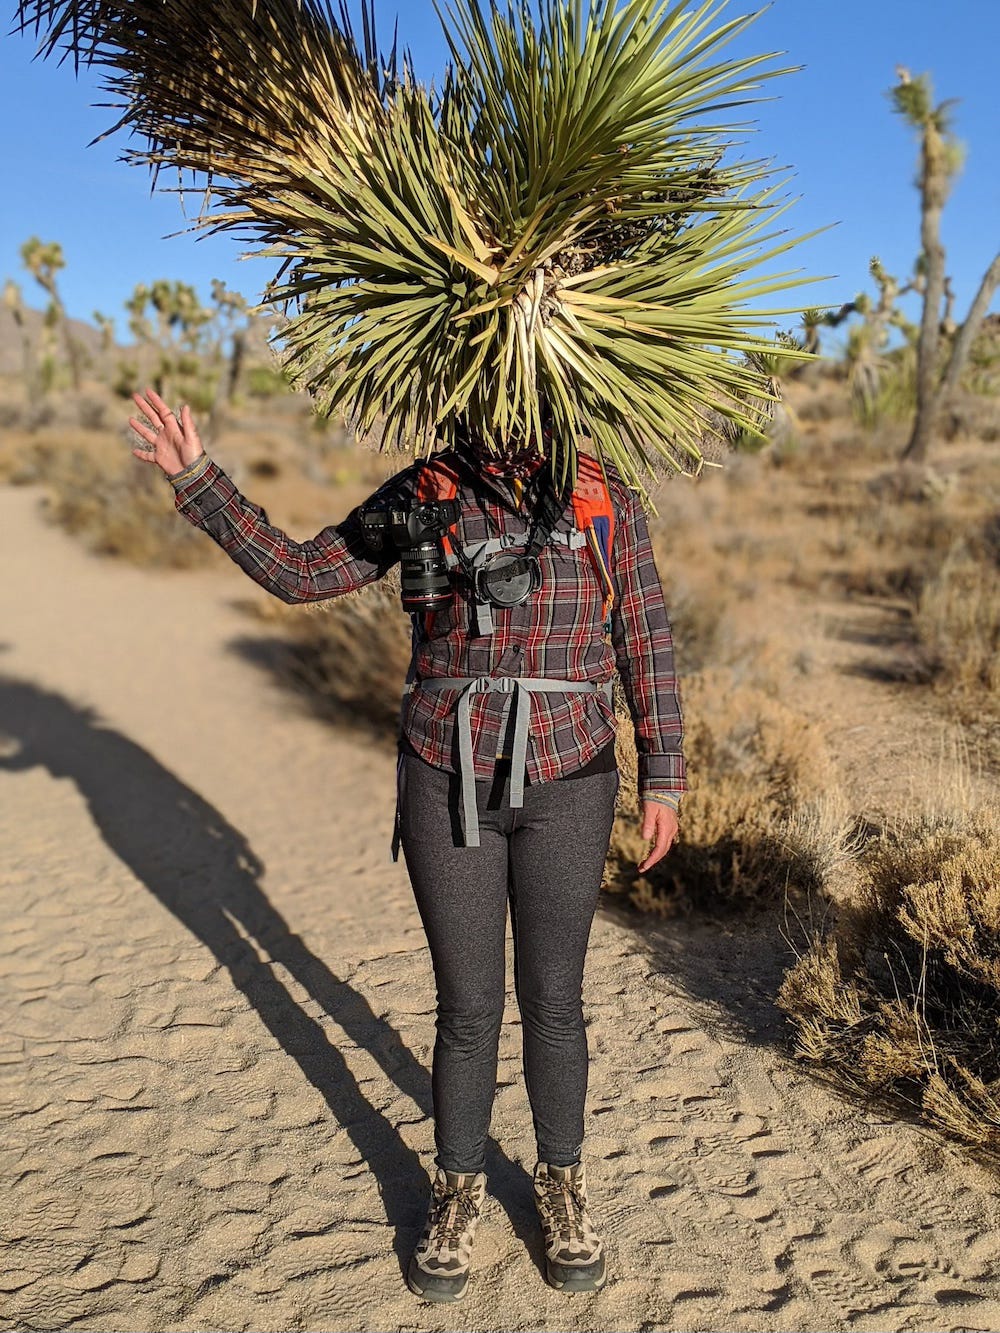 person standing behind a Joshua Tree branch